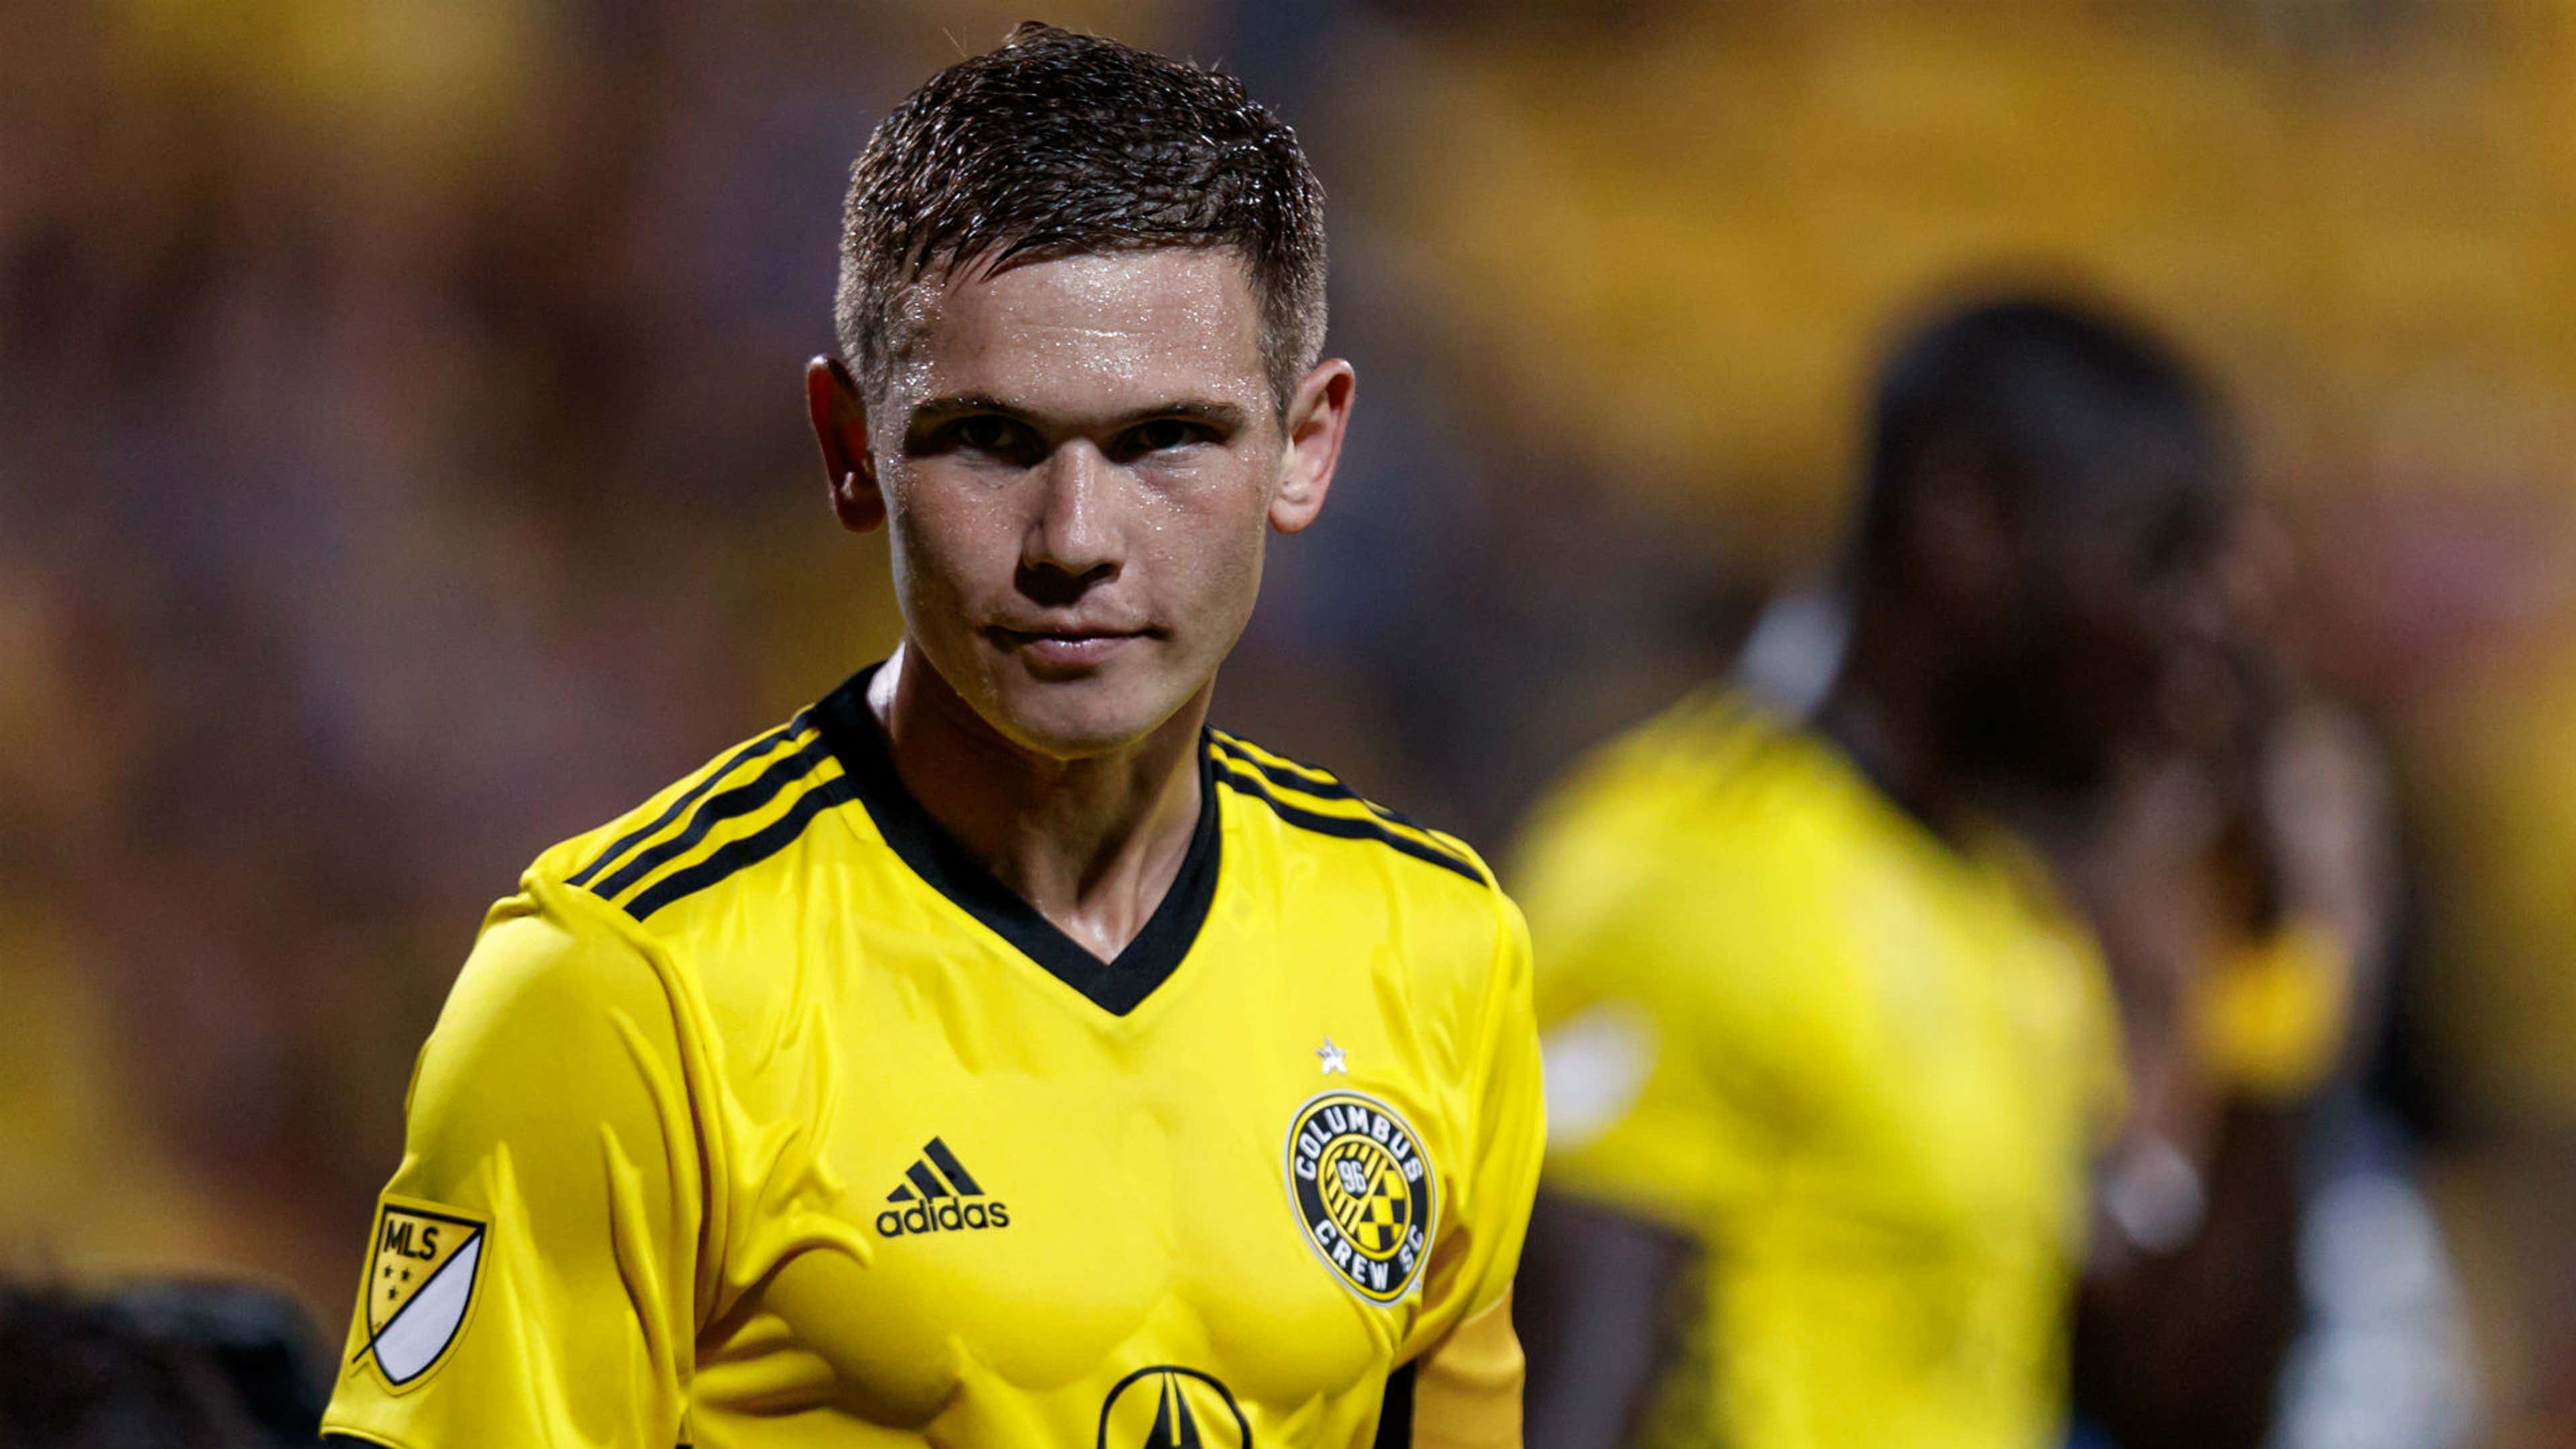 Columbus Crew 2019 season preview: Roster, projected lineup